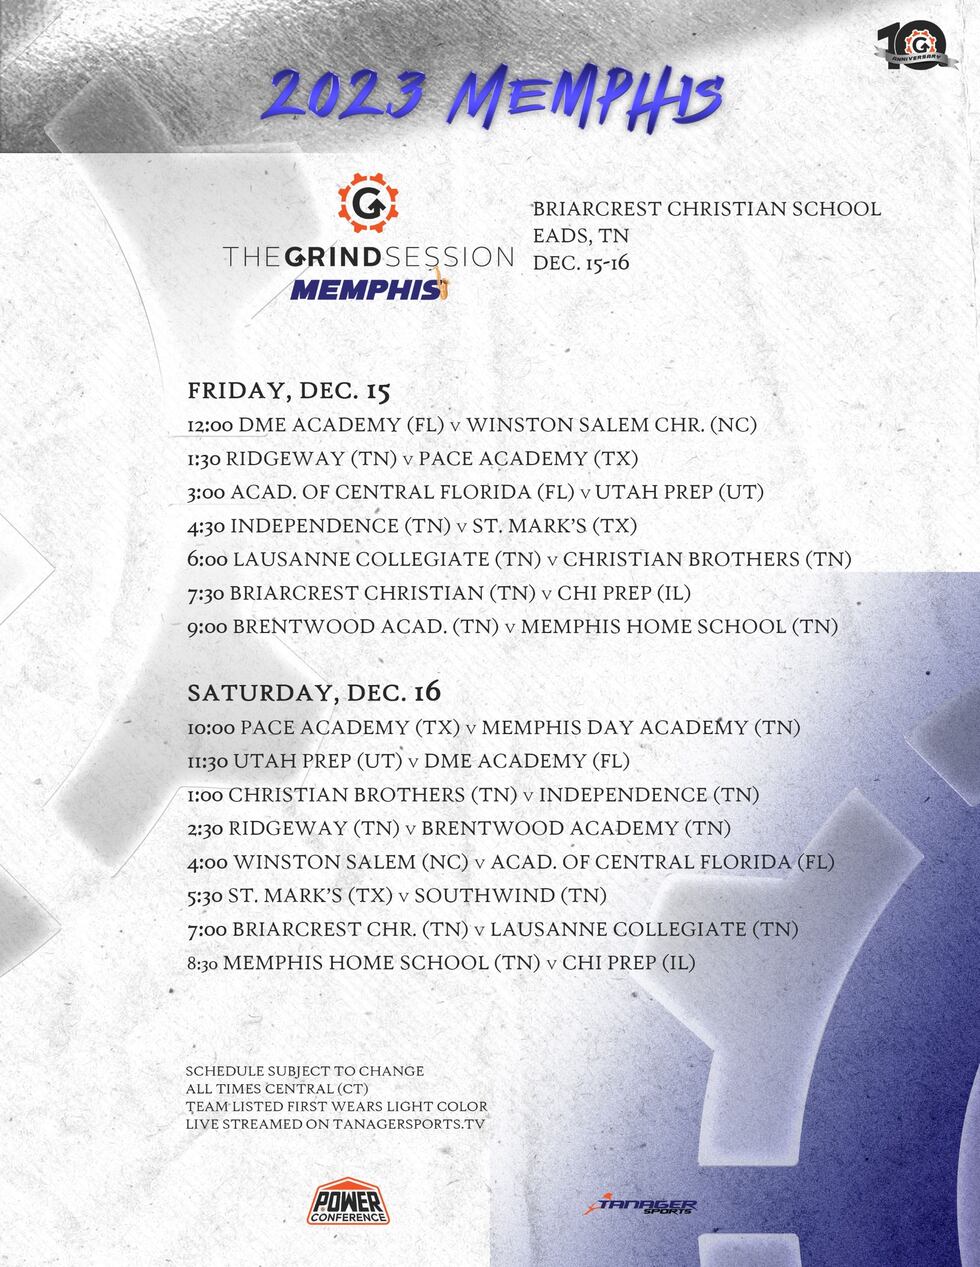 This weekend’s event will feature 15 teams, 15 games, and an impressive lineup of some of the...